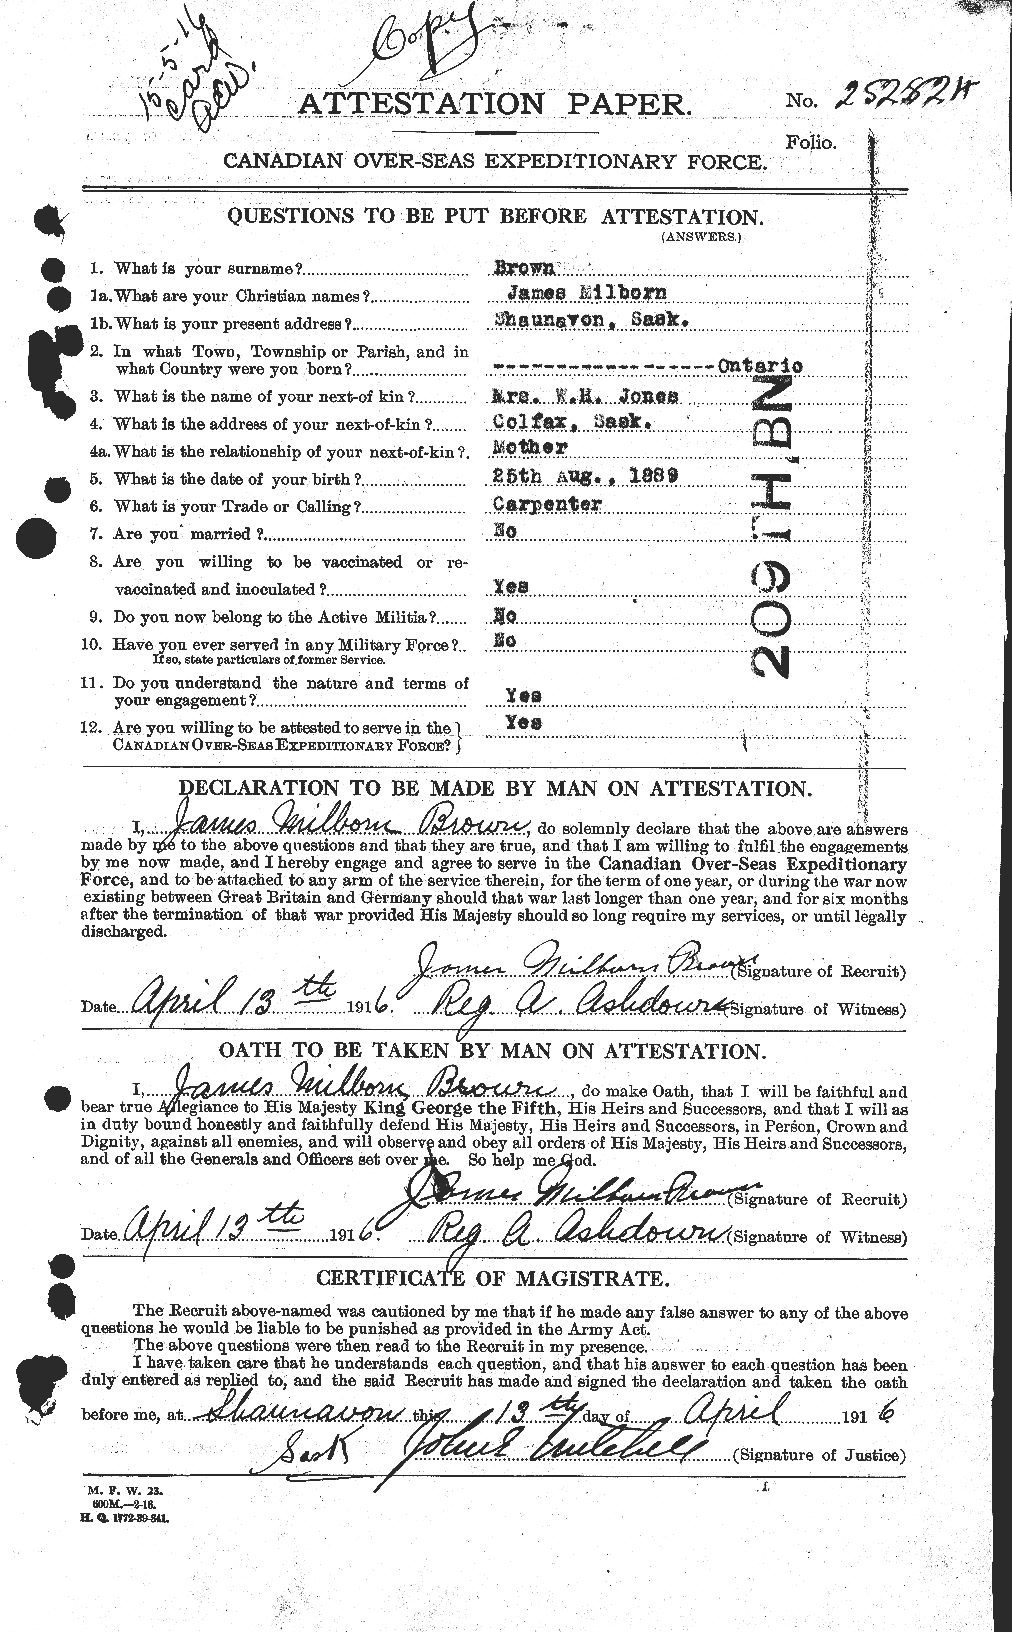 Personnel Records of the First World War - CEF 269557a